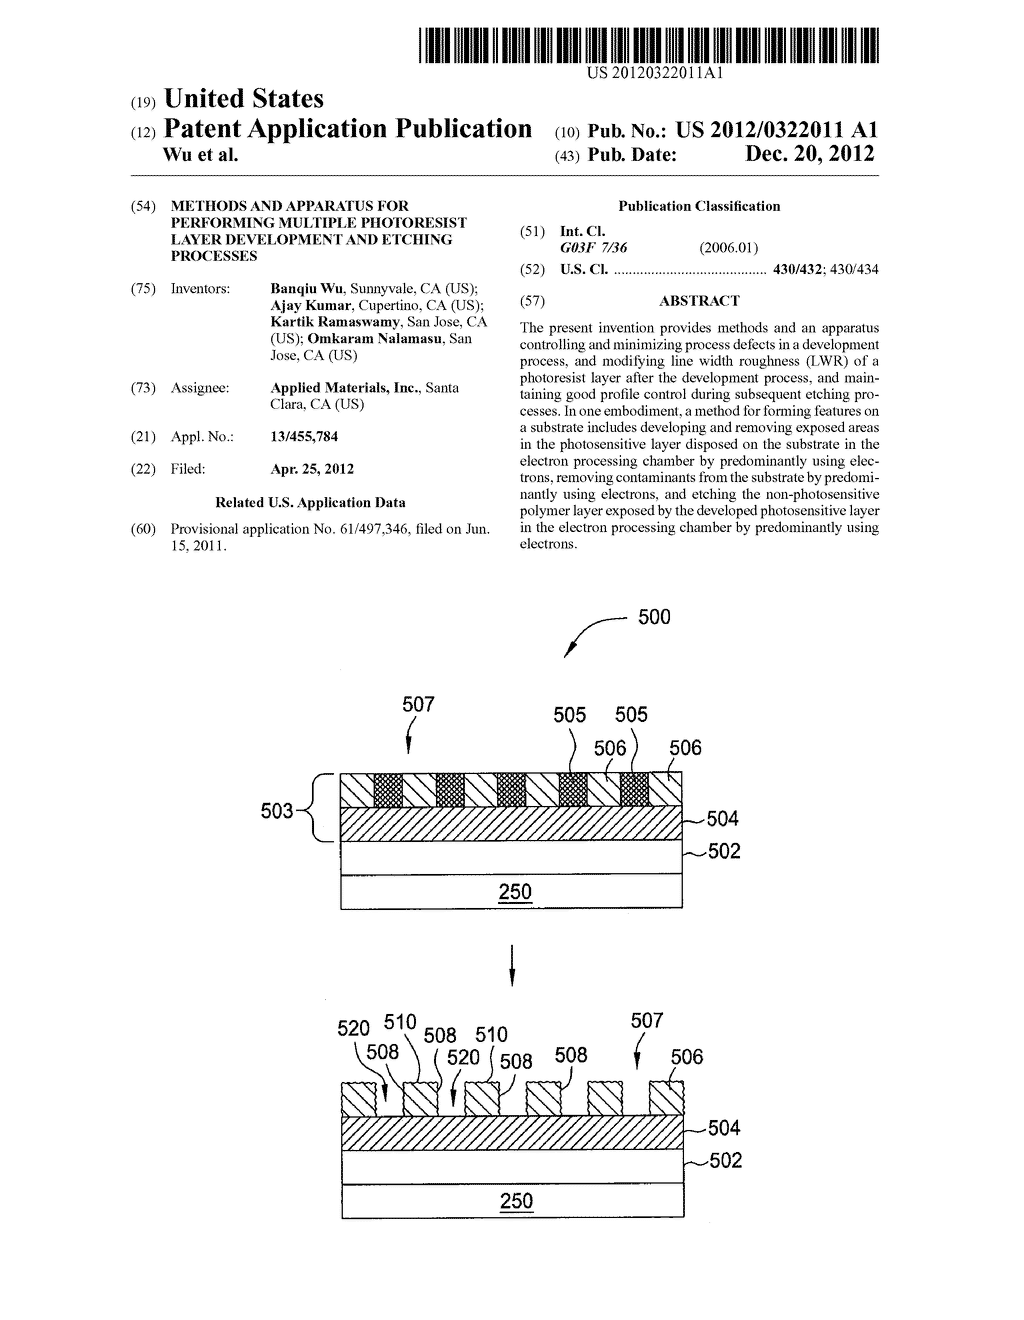 METHODS AND APPARATUS FOR PERFORMING MULTIPLE PHOTORESIST LAYER     DEVELOPMENT AND ETCHING PROCESSES - diagram, schematic, and image 01